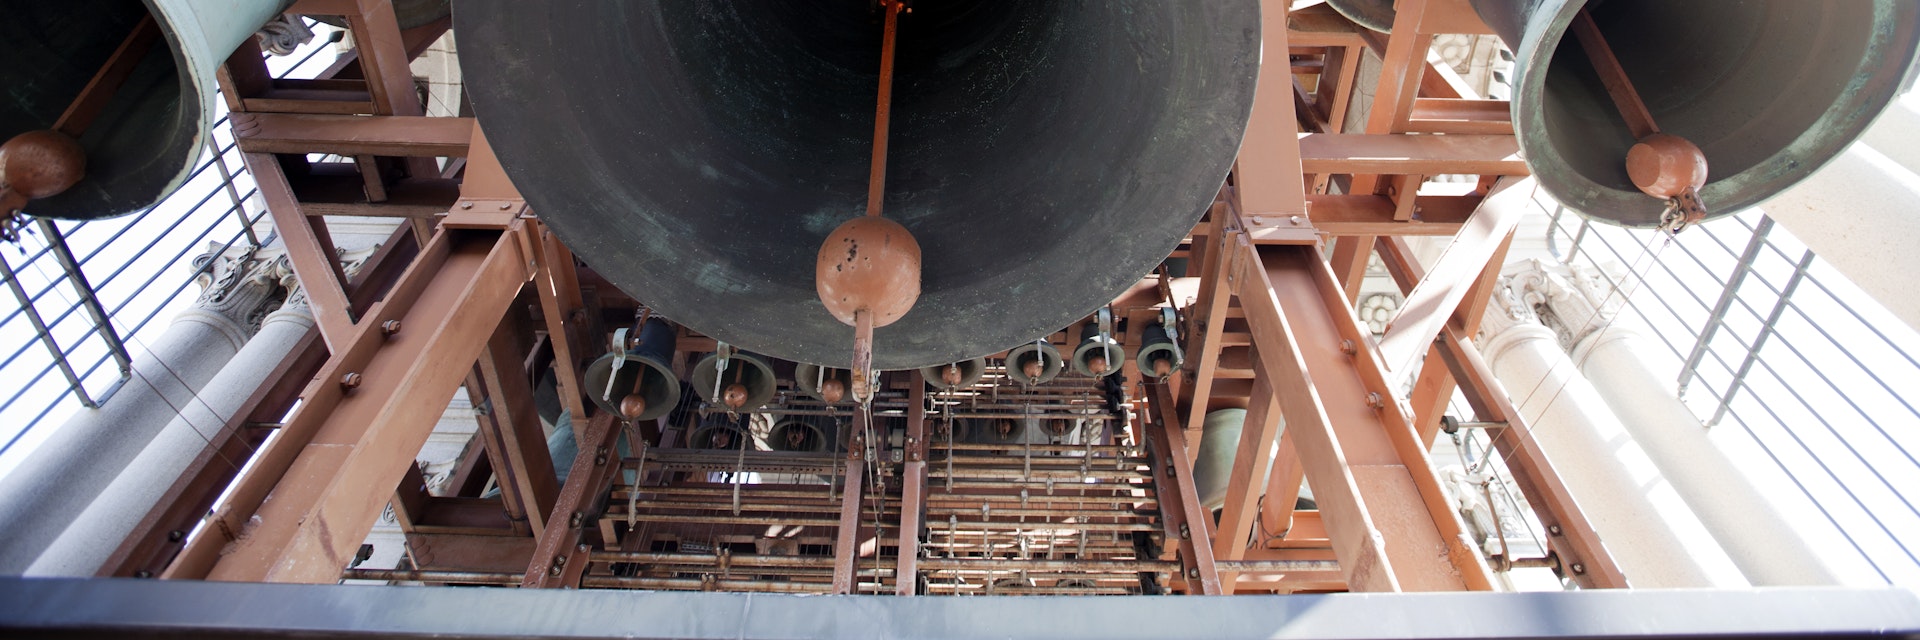 Bells in Sather Tower: University of California